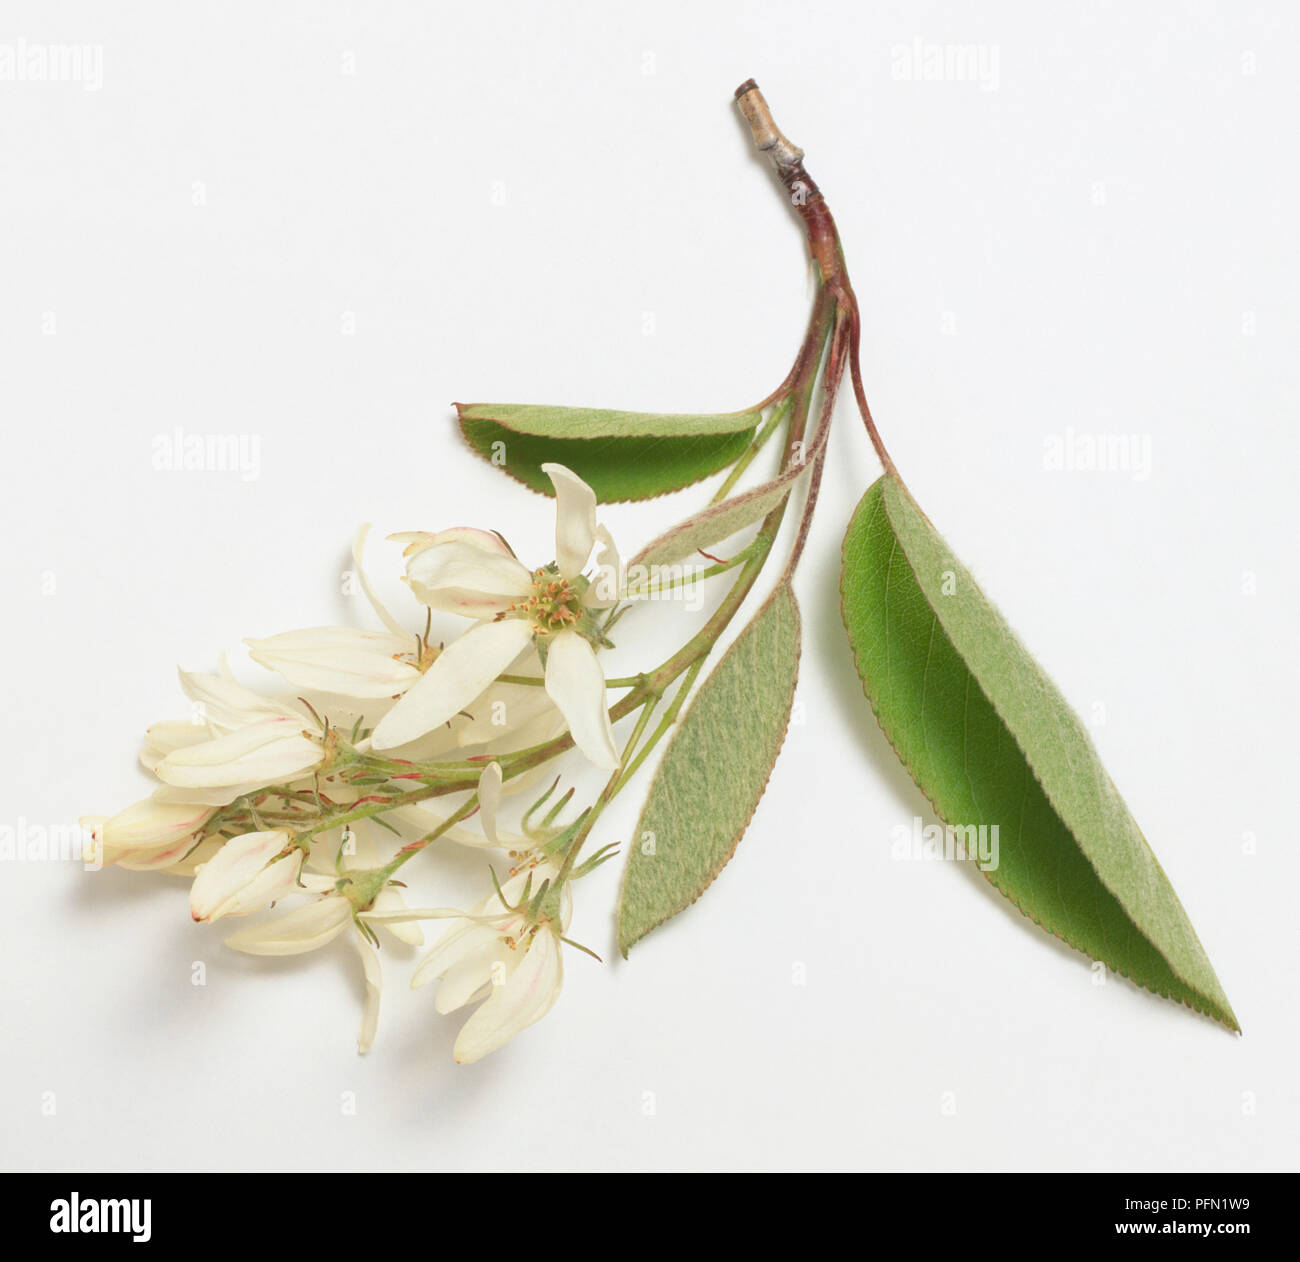 Amelanchier asiatica (Asian serviceberry), branch with white flowers and leaves, close-up Stock Photo